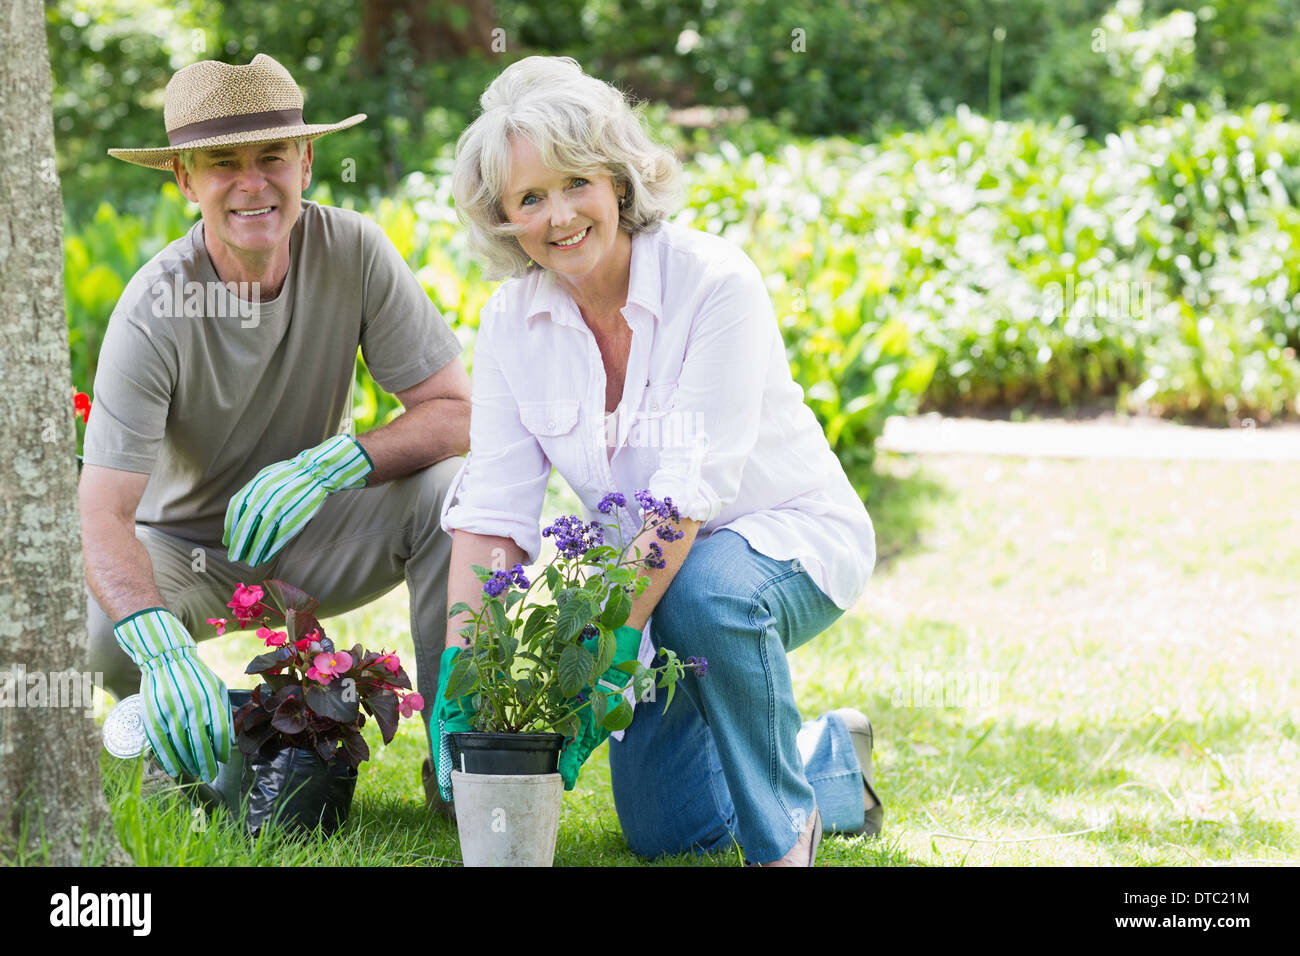 Mature couple engaged in gardening Banque D'Images